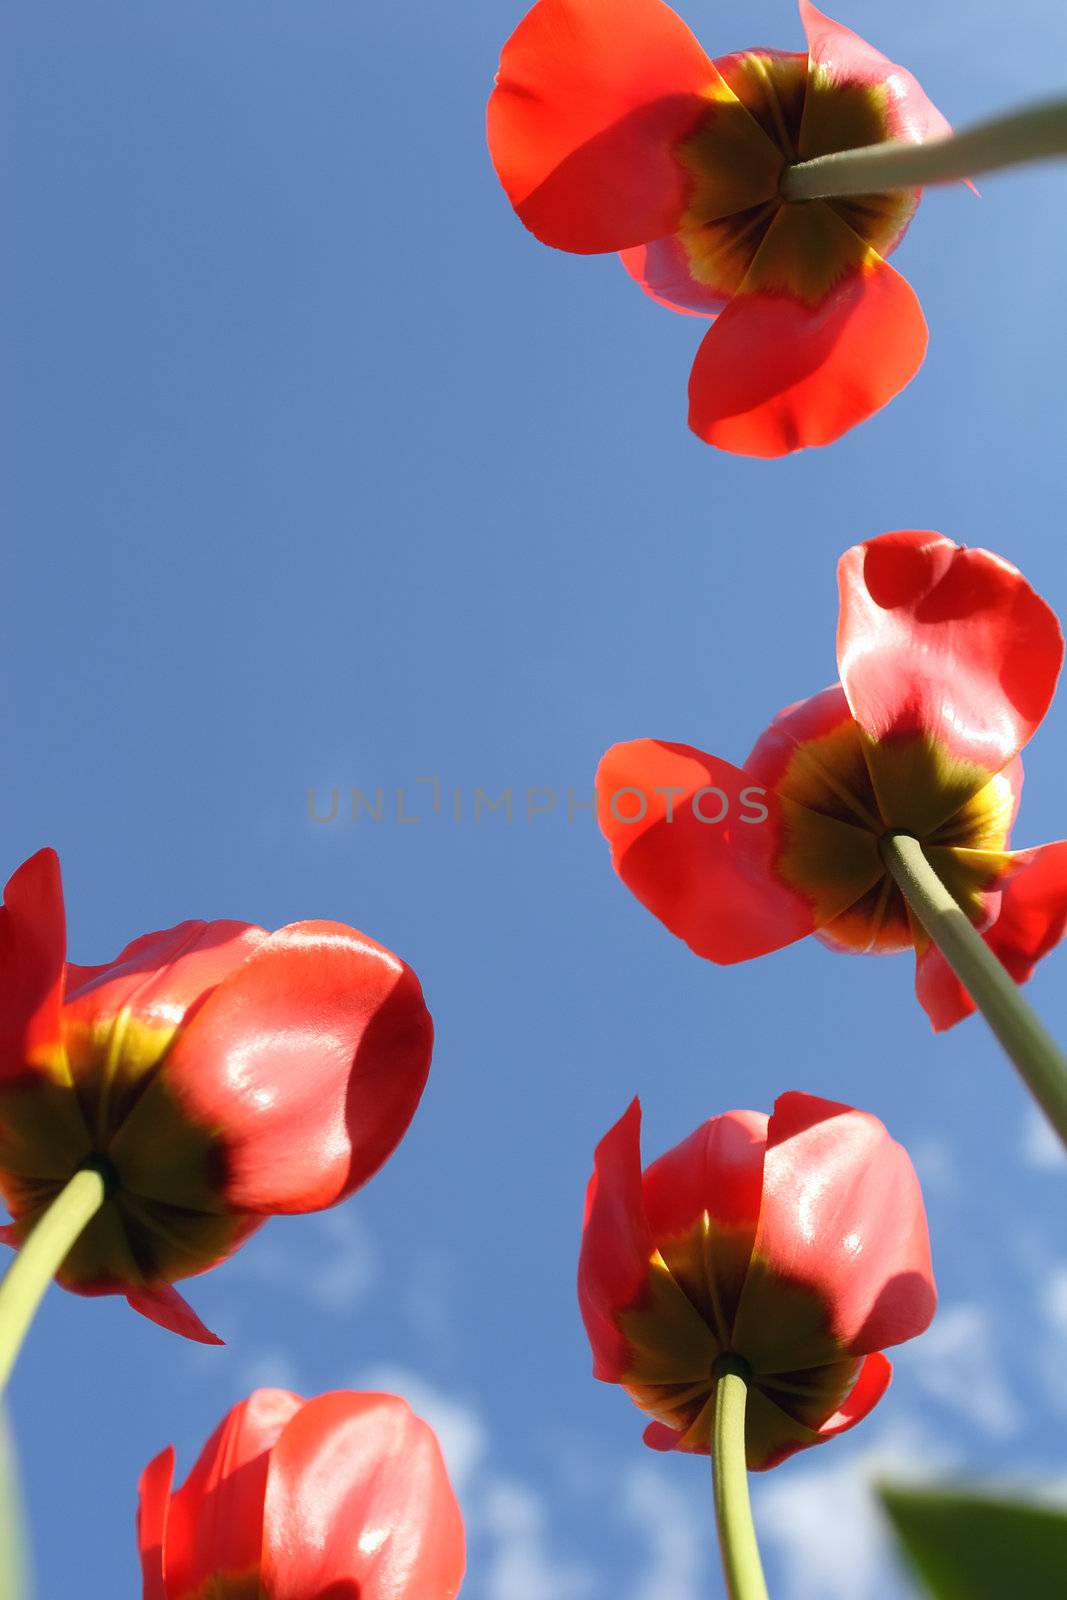 Red tulips by Astroid